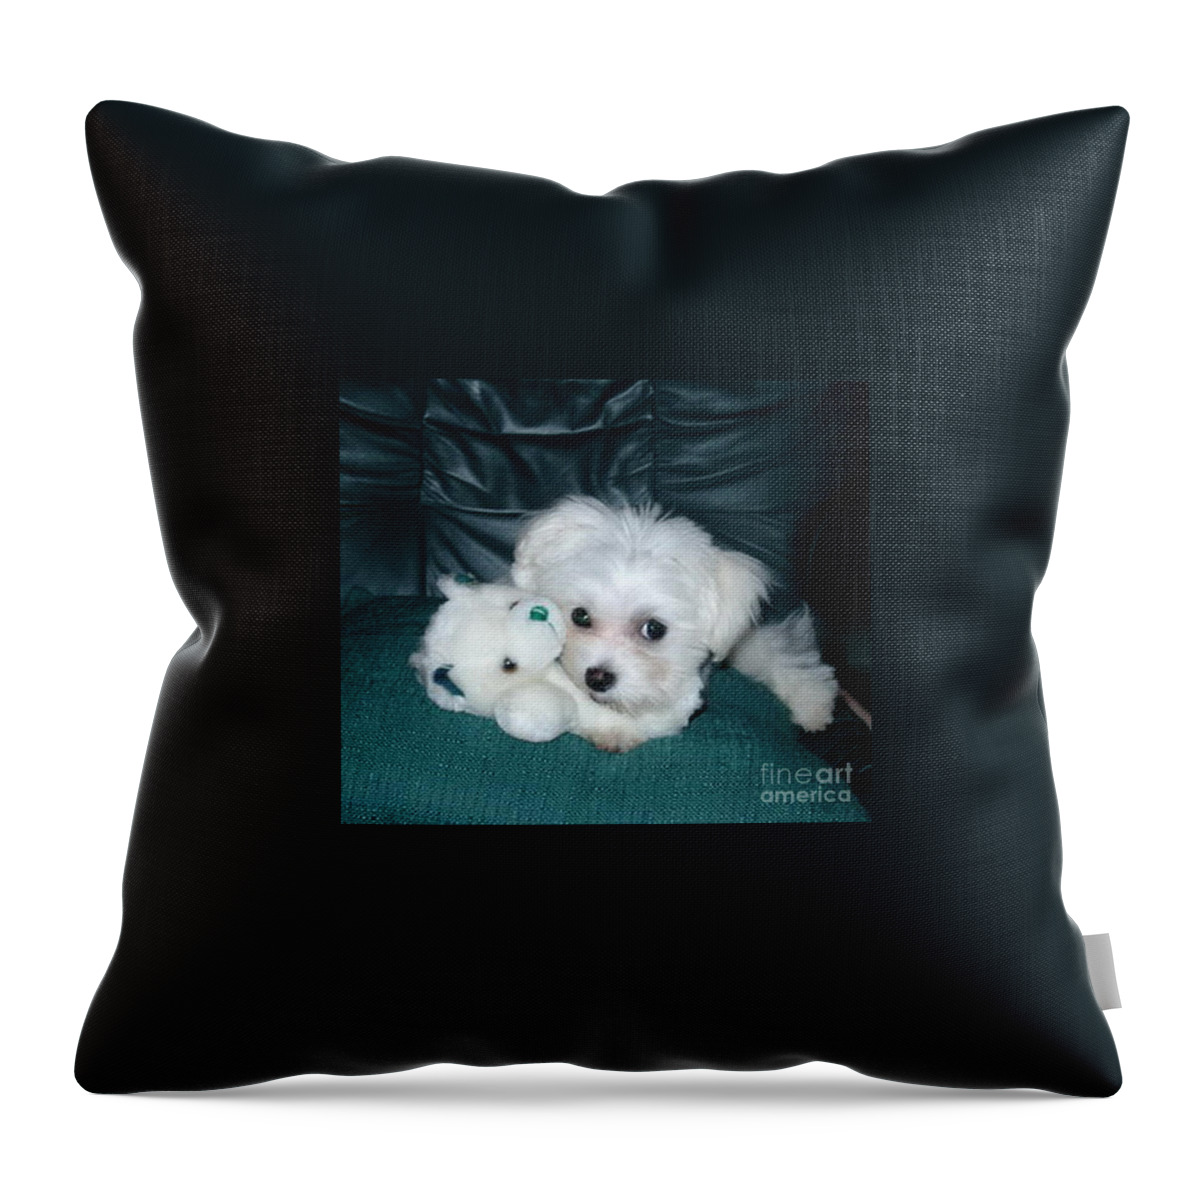 My Dog Throw Pillow featuring the photograph My Dog Maggie by Joyce Gebauer